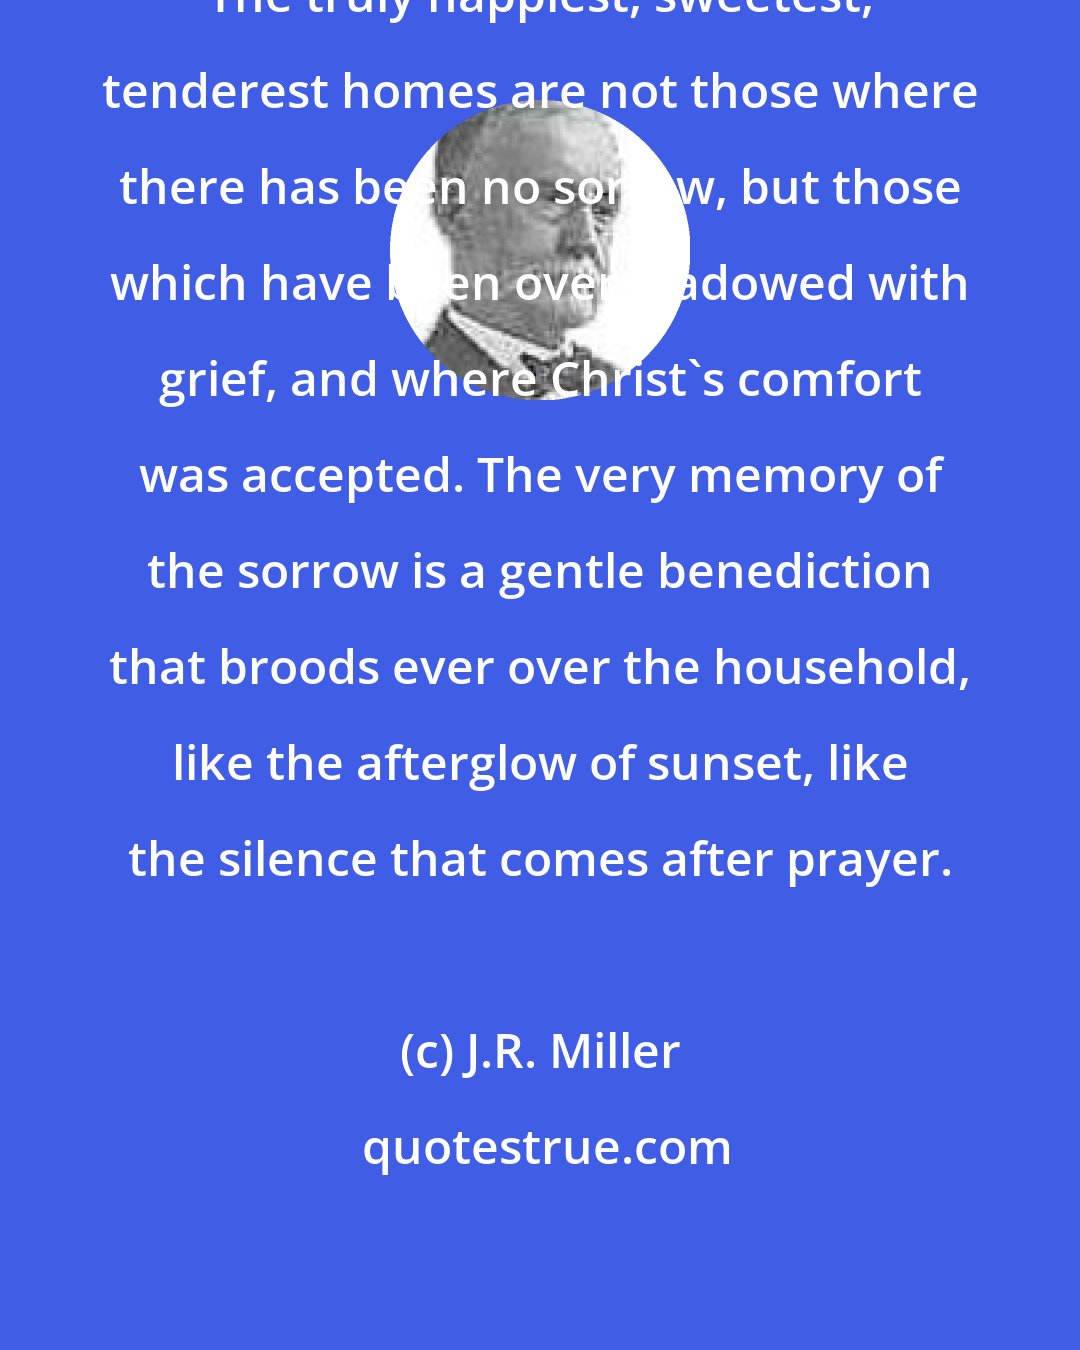 J.R. Miller: The truly happiest, sweetest, tenderest homes are not those where there has been no sorrow, but those which have been overshadowed with grief, and where Christ's comfort was accepted. The very memory of the sorrow is a gentle benediction that broods ever over the household, like the afterglow of sunset, like the silence that comes after prayer.